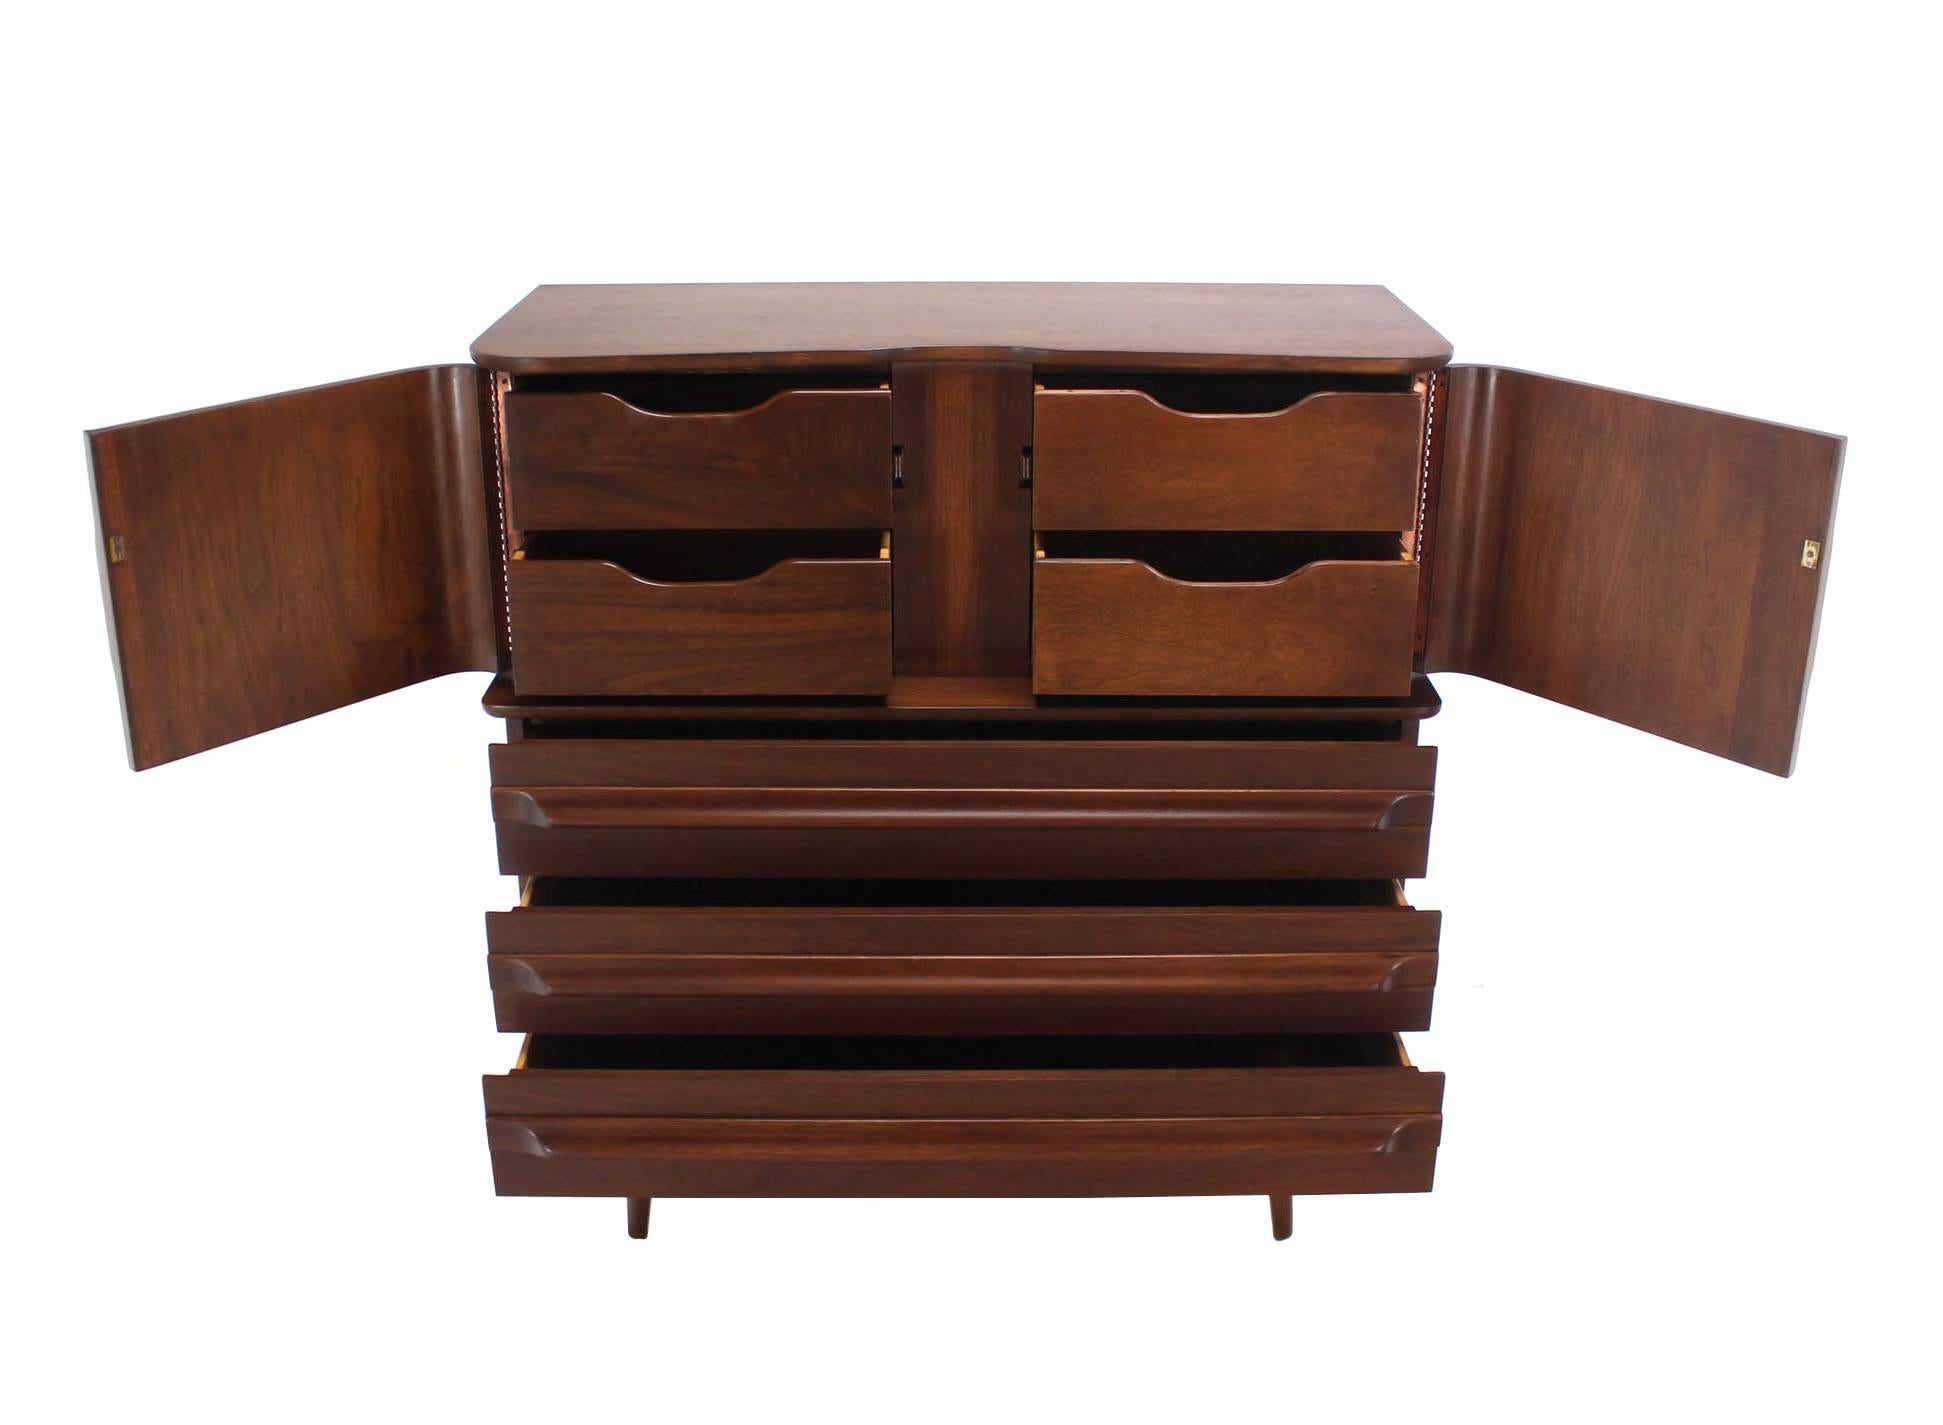 American Walnut High Chest or Dresser w/ Drawers and Two Doors Compartment